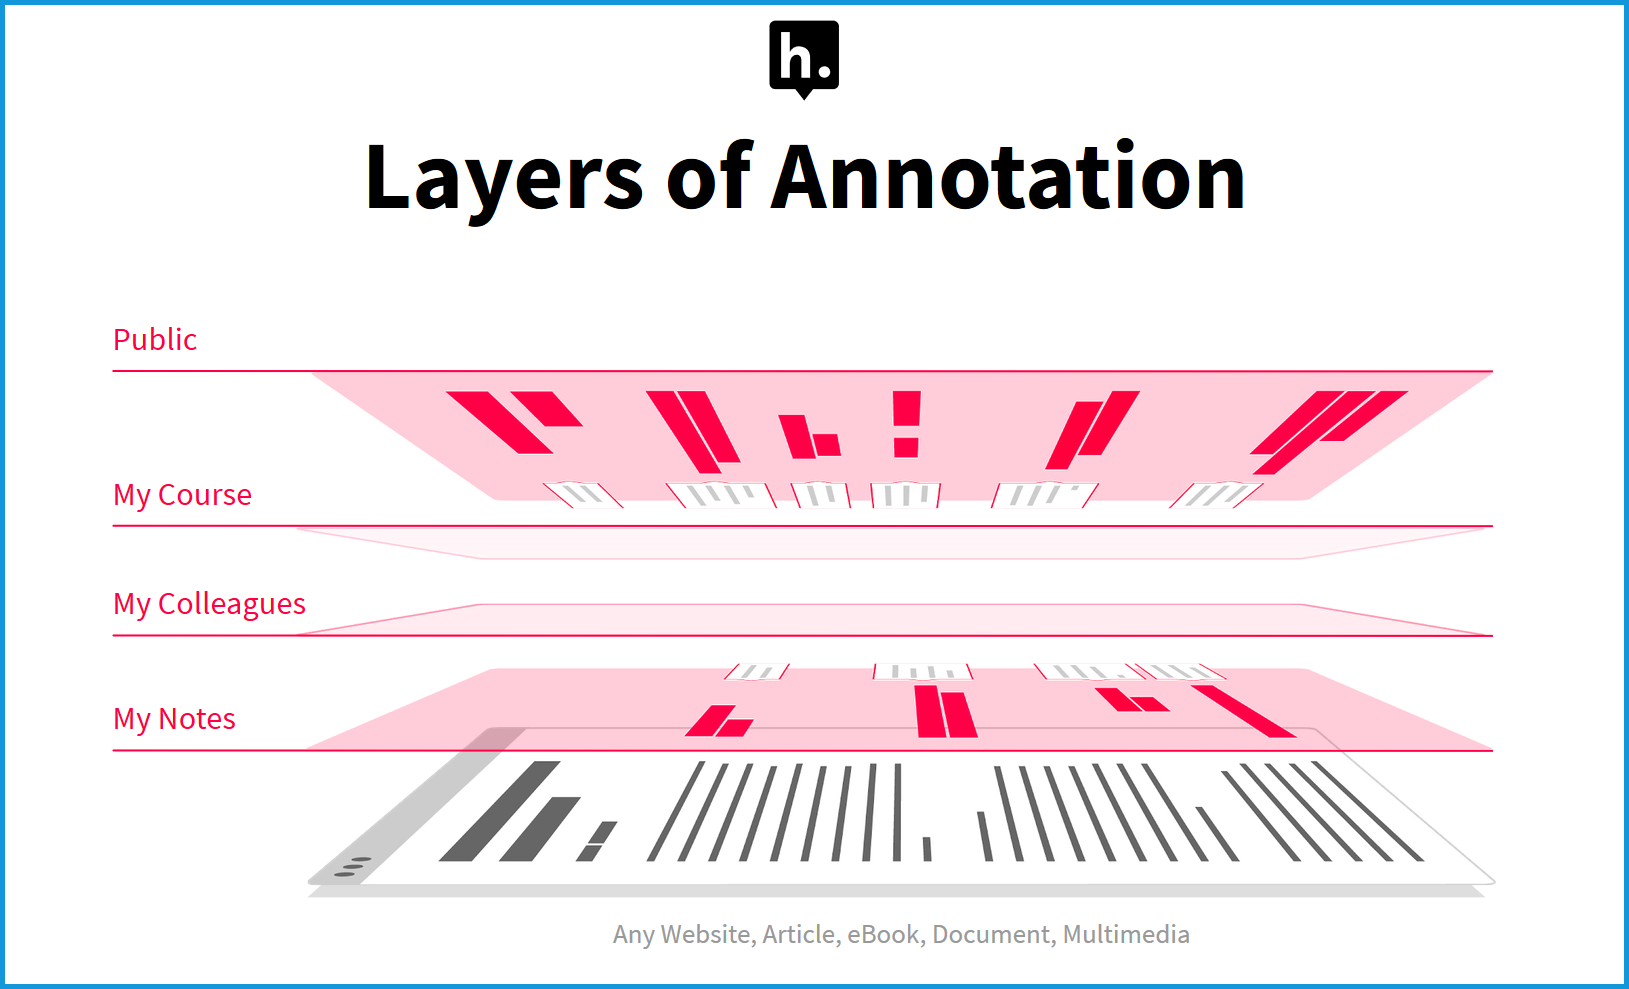 This shows the layers on which annotations can be made from public to course to personal notes.